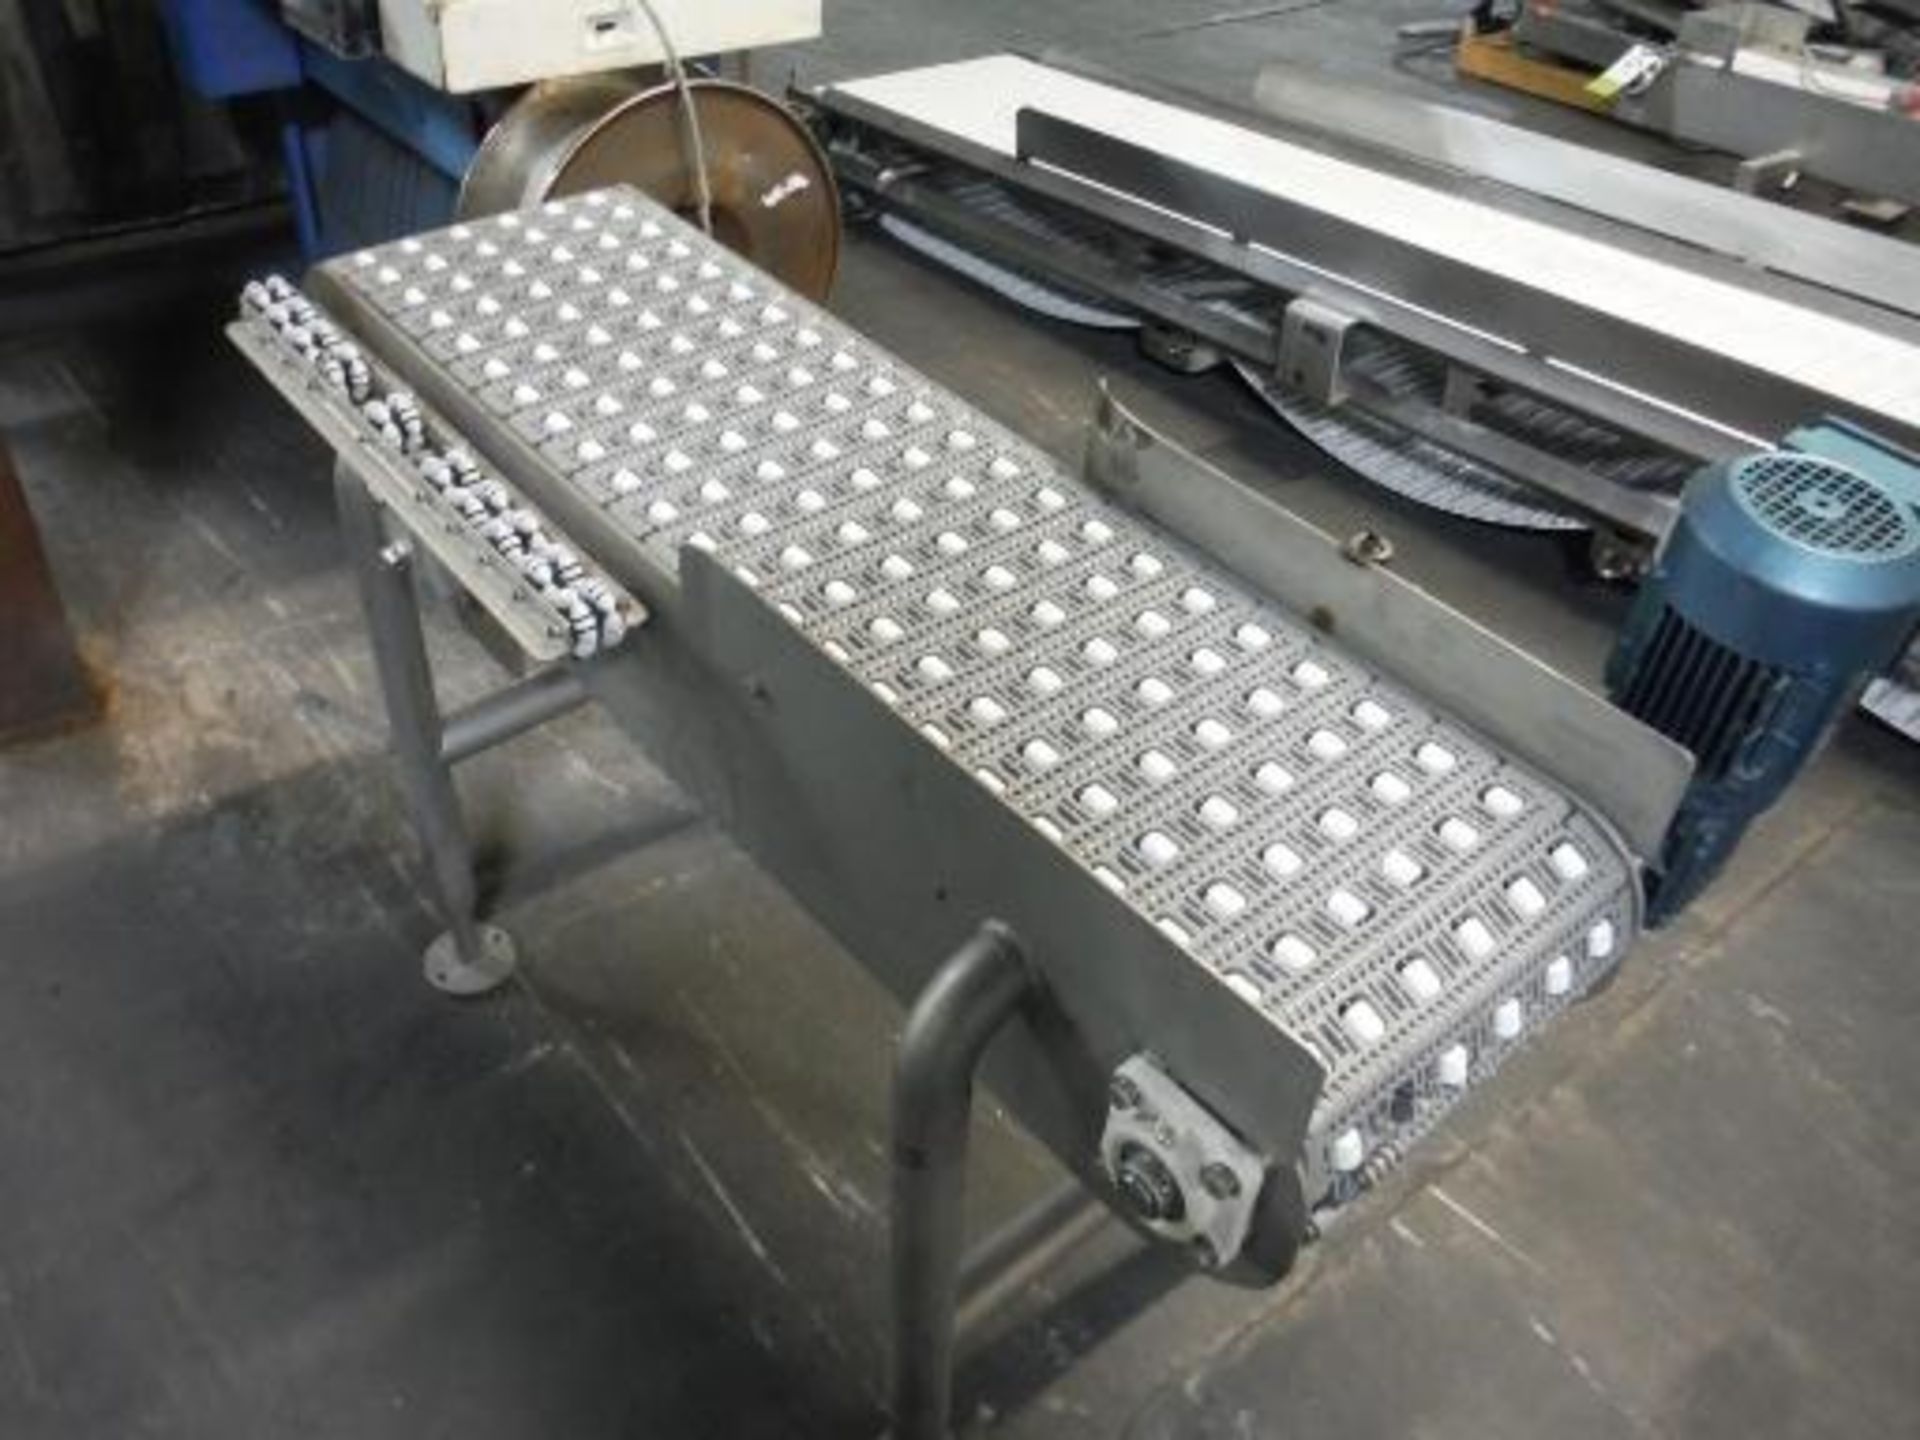 Powered conveyor, plastic interlock belt with free rolling side rollers, 48 in. long x 12 in. wide x - Image 2 of 2